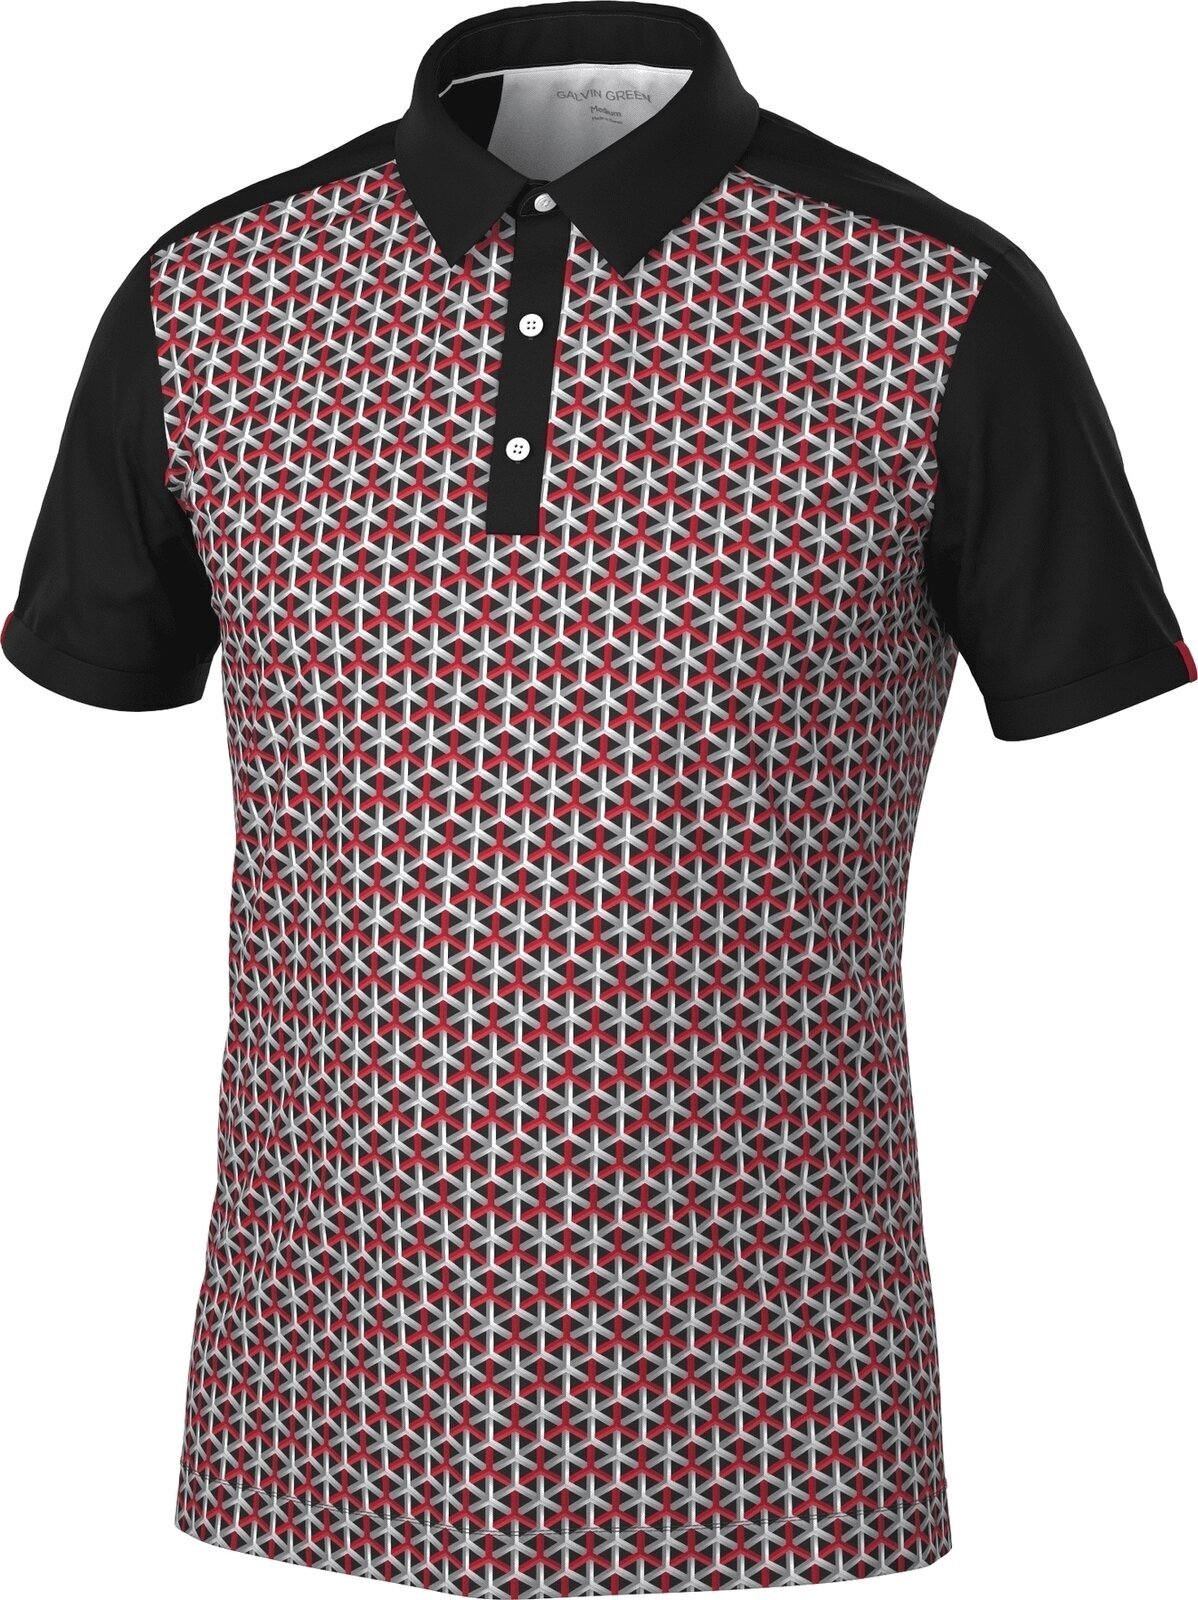 Polo Galvin Green Mio Mens Breathable Short Sleeve Shirt Red/Black L